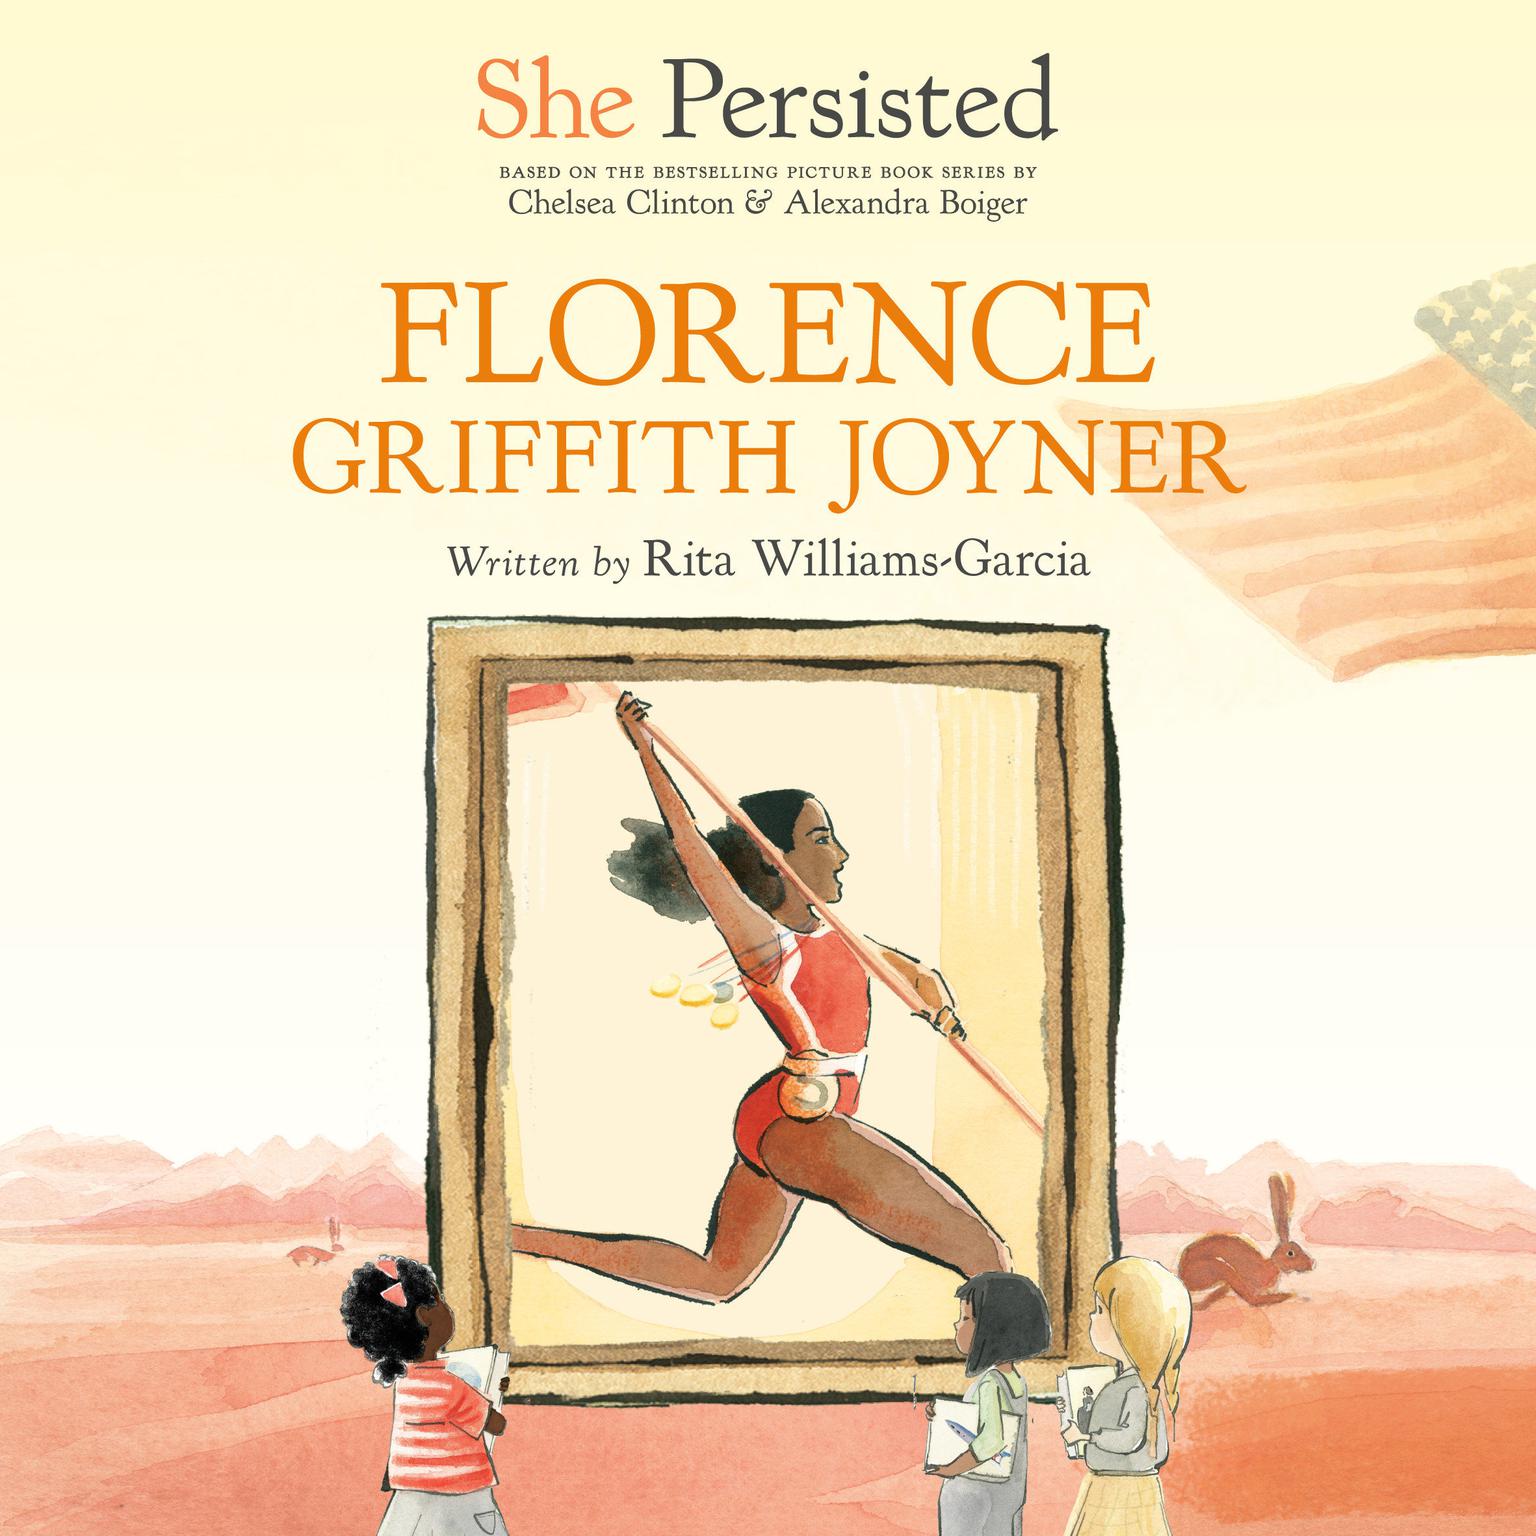 She Persisted: Florence Griffith Joyner Audiobook, by Rita Williams-Garcia